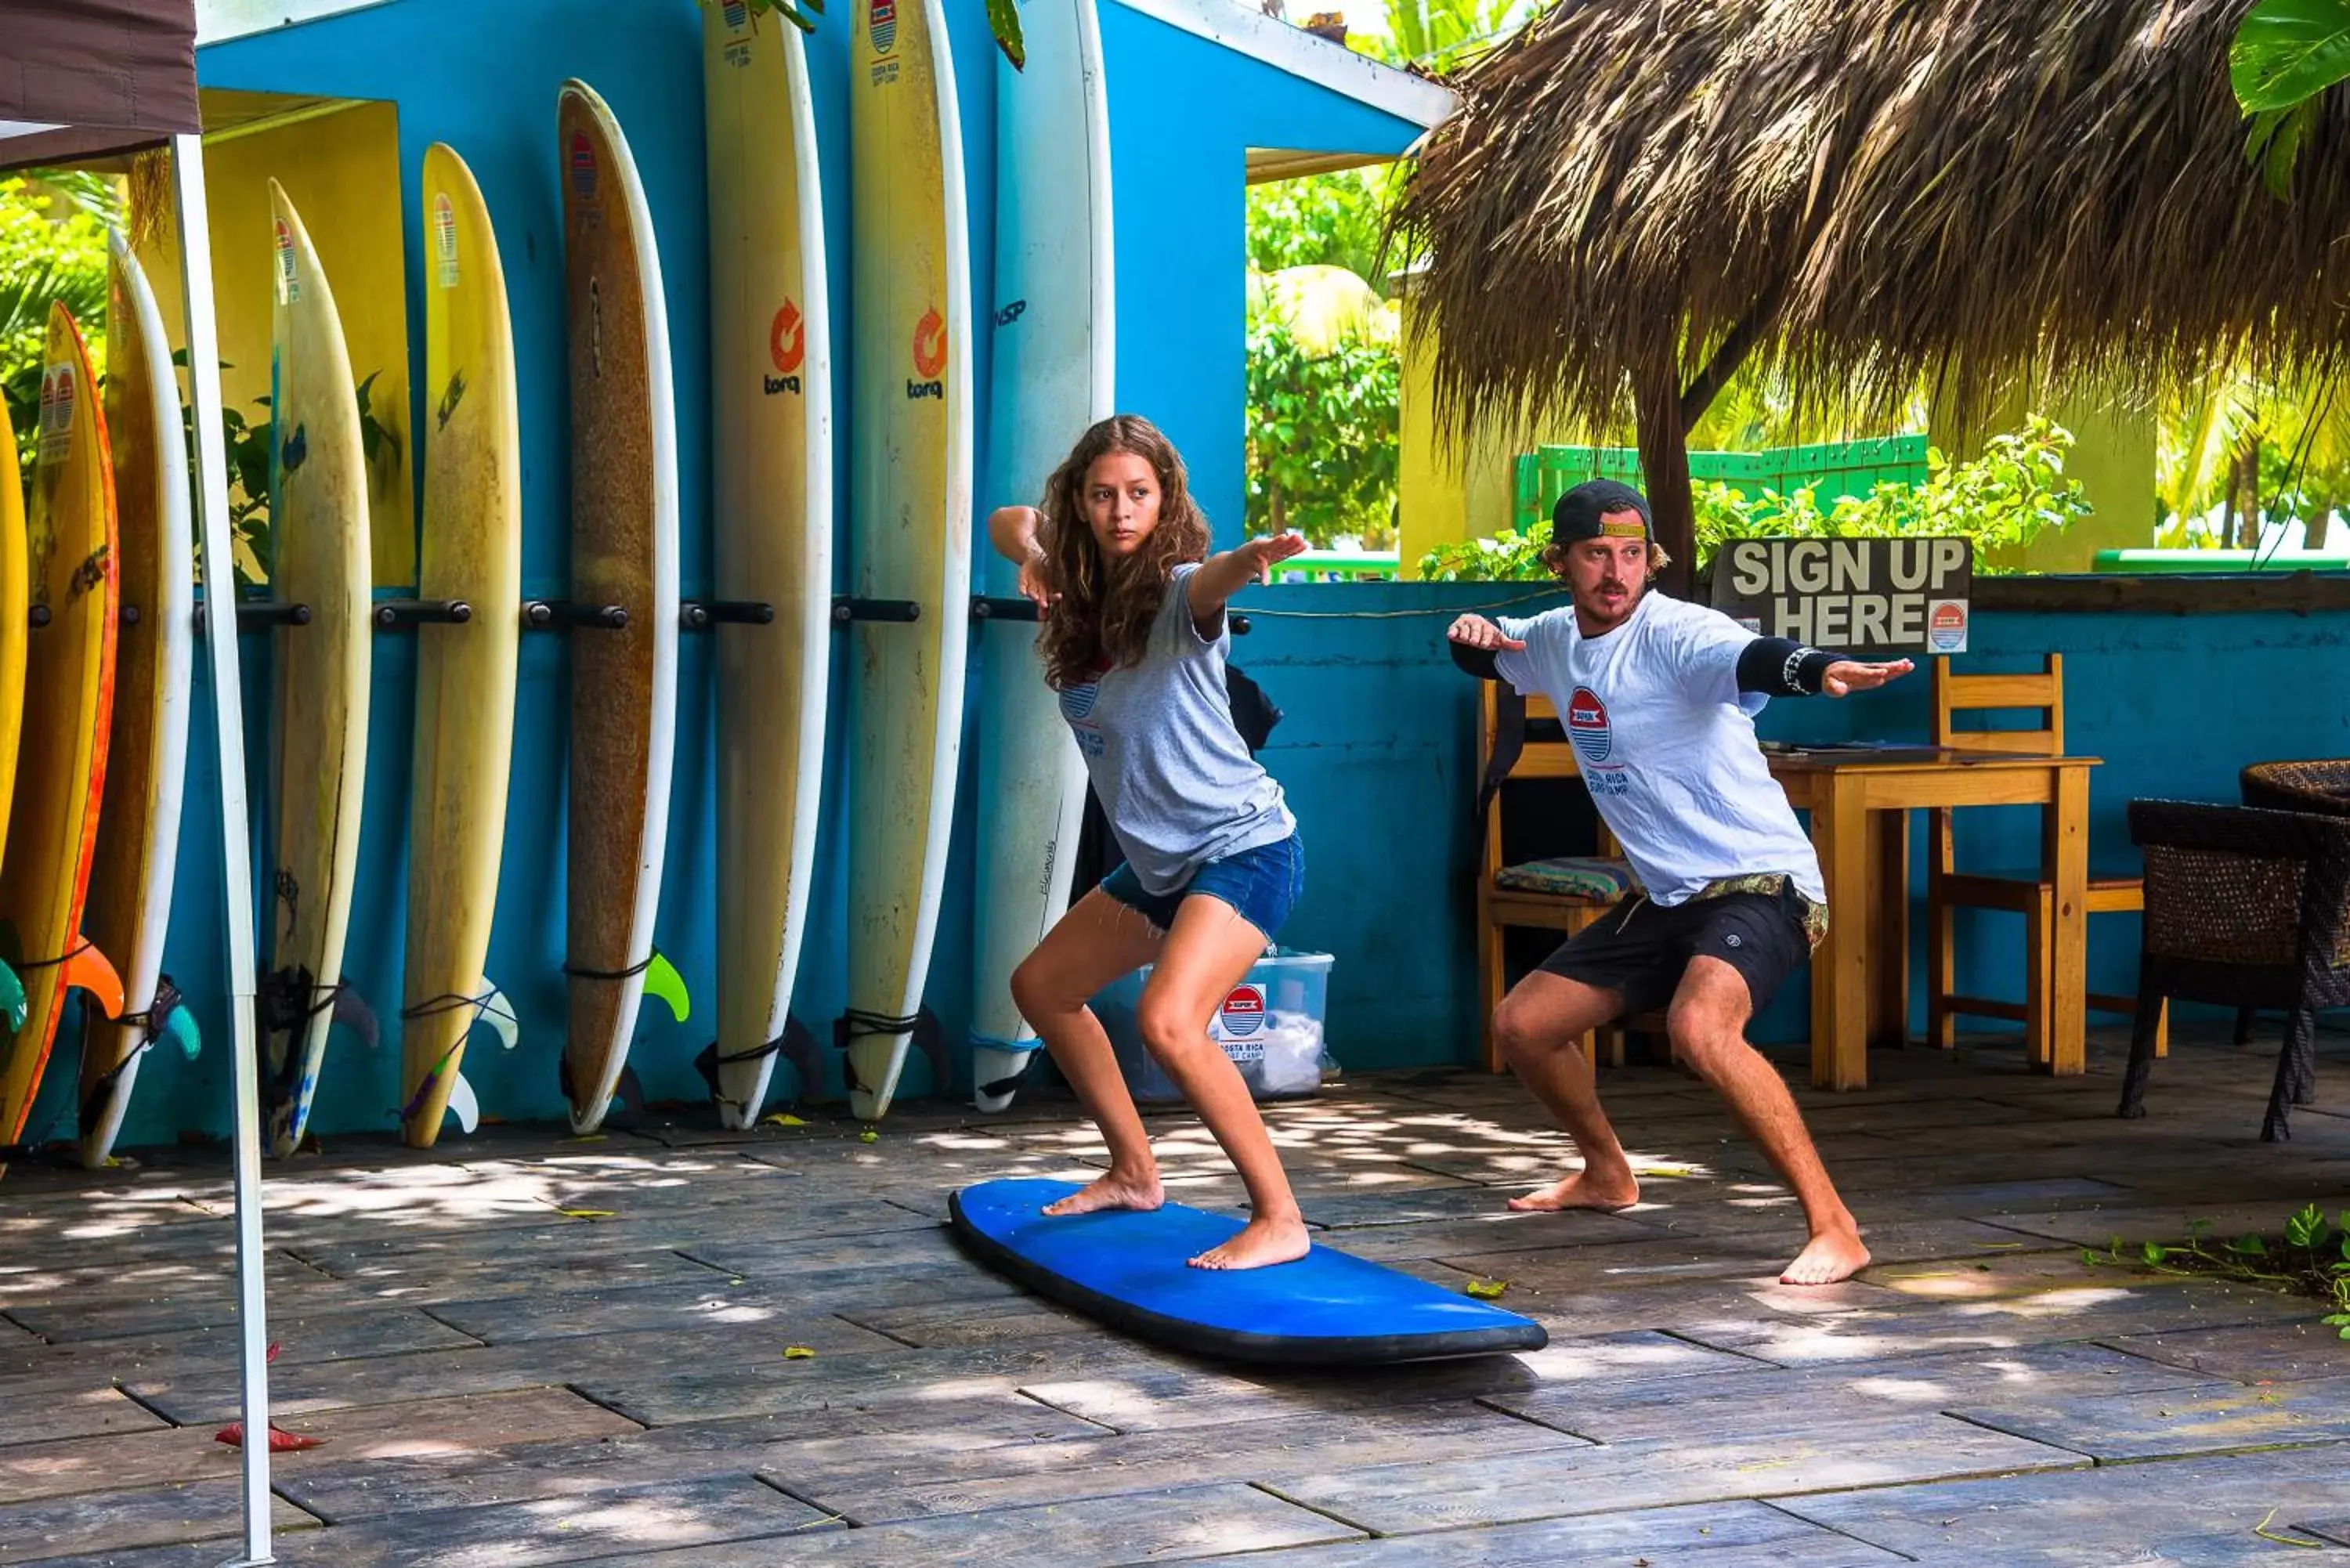 Area and facilities, Children in Costa Rica Surf Camp by SUPERbrand